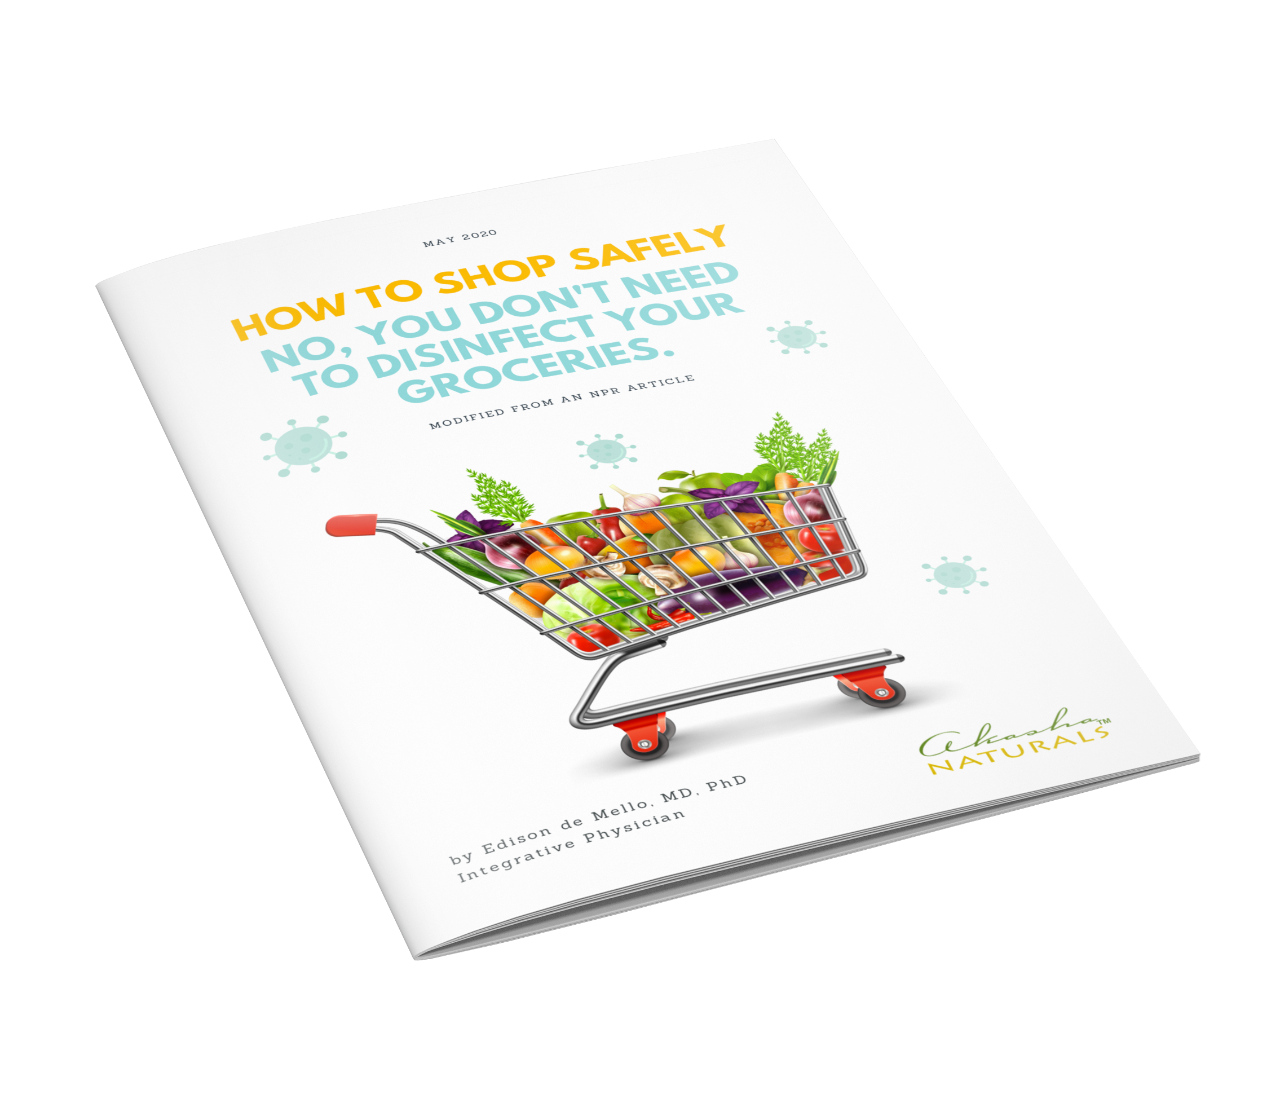 COVID-19: HOW TO SHOP SAFELY --No, you don't need to disinfect your groceries. ebook cover